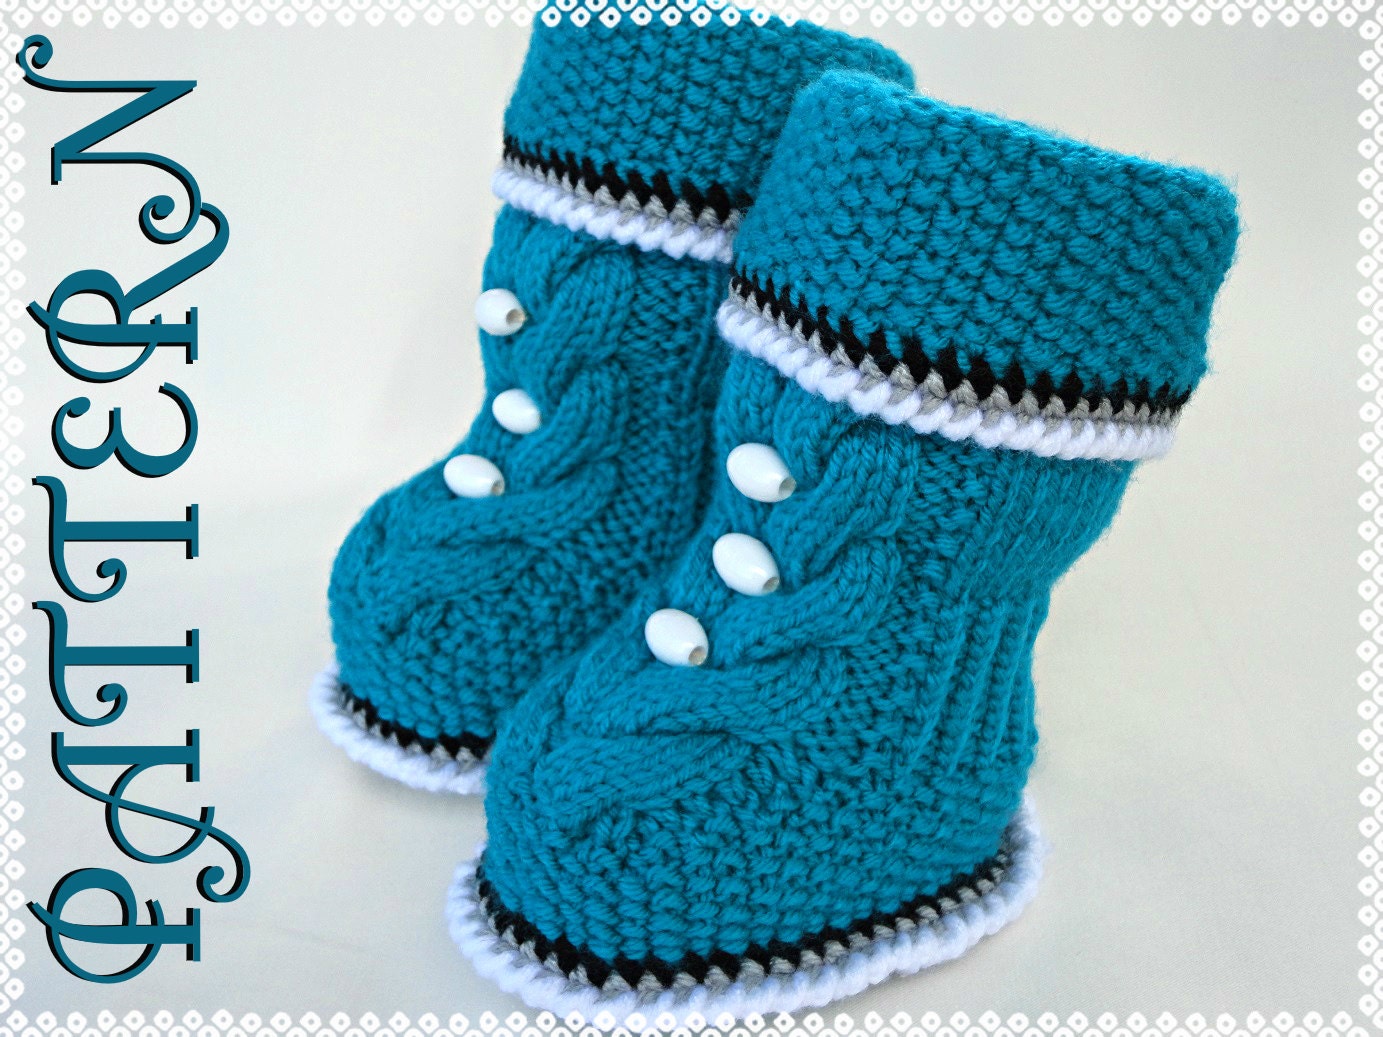 P A T T E R N Baby Booties Baby Shoes Pattern Knitted Baby Booties Knitting Pattern Baby Booty Baby Uggs Patterns Baby Boots ( PDF file )